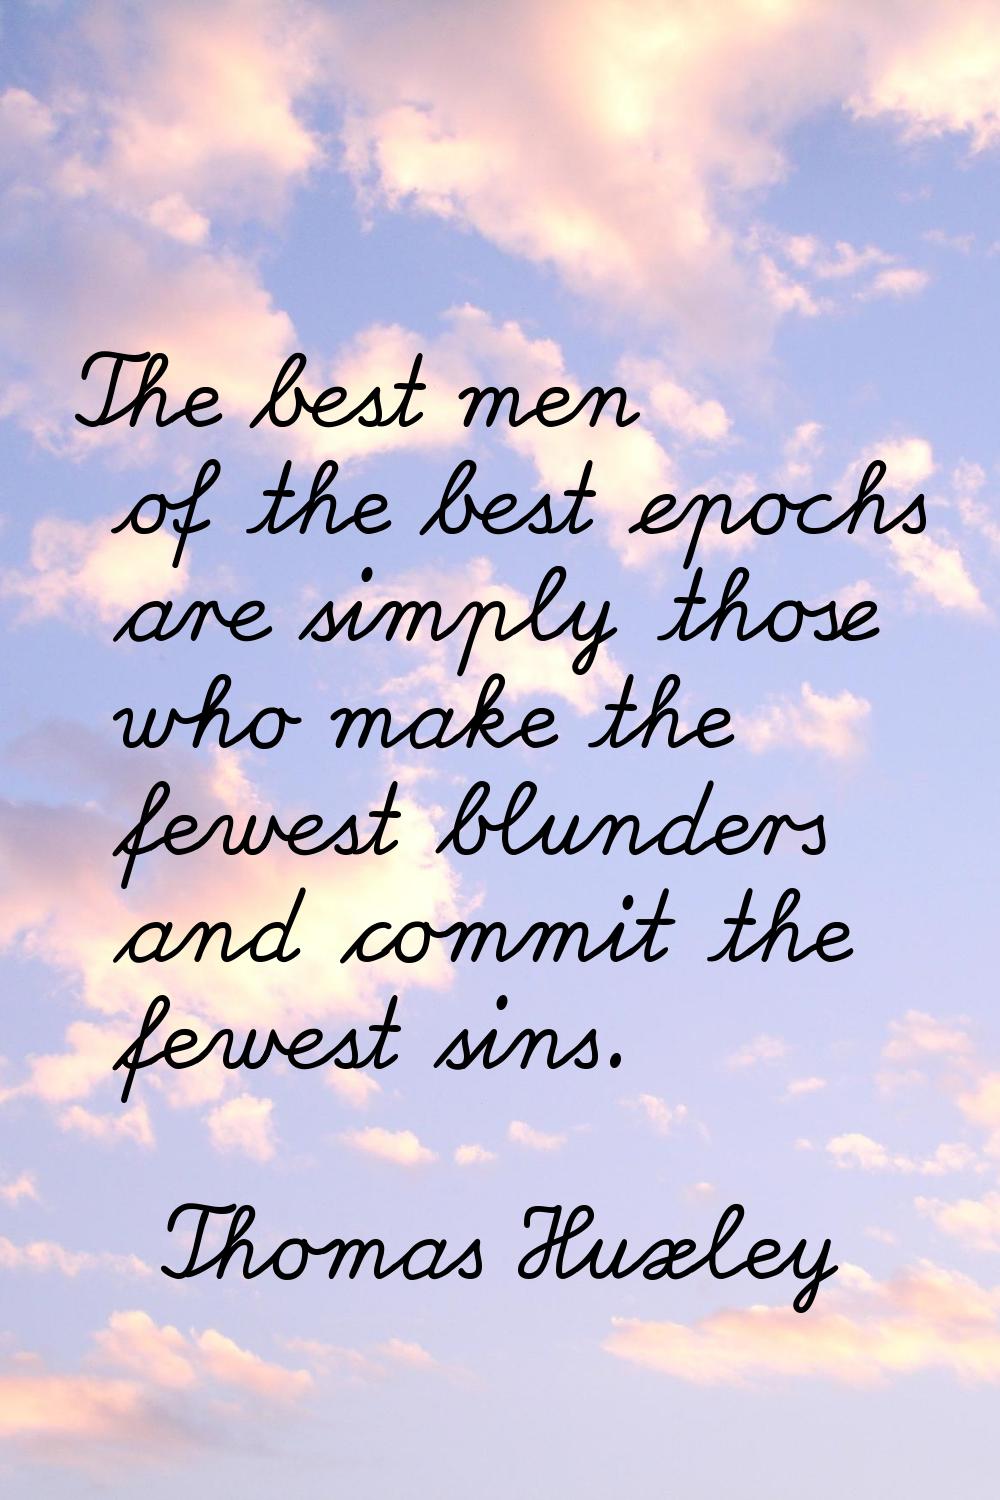 The best men of the best epochs are simply those who make the fewest blunders and commit the fewest